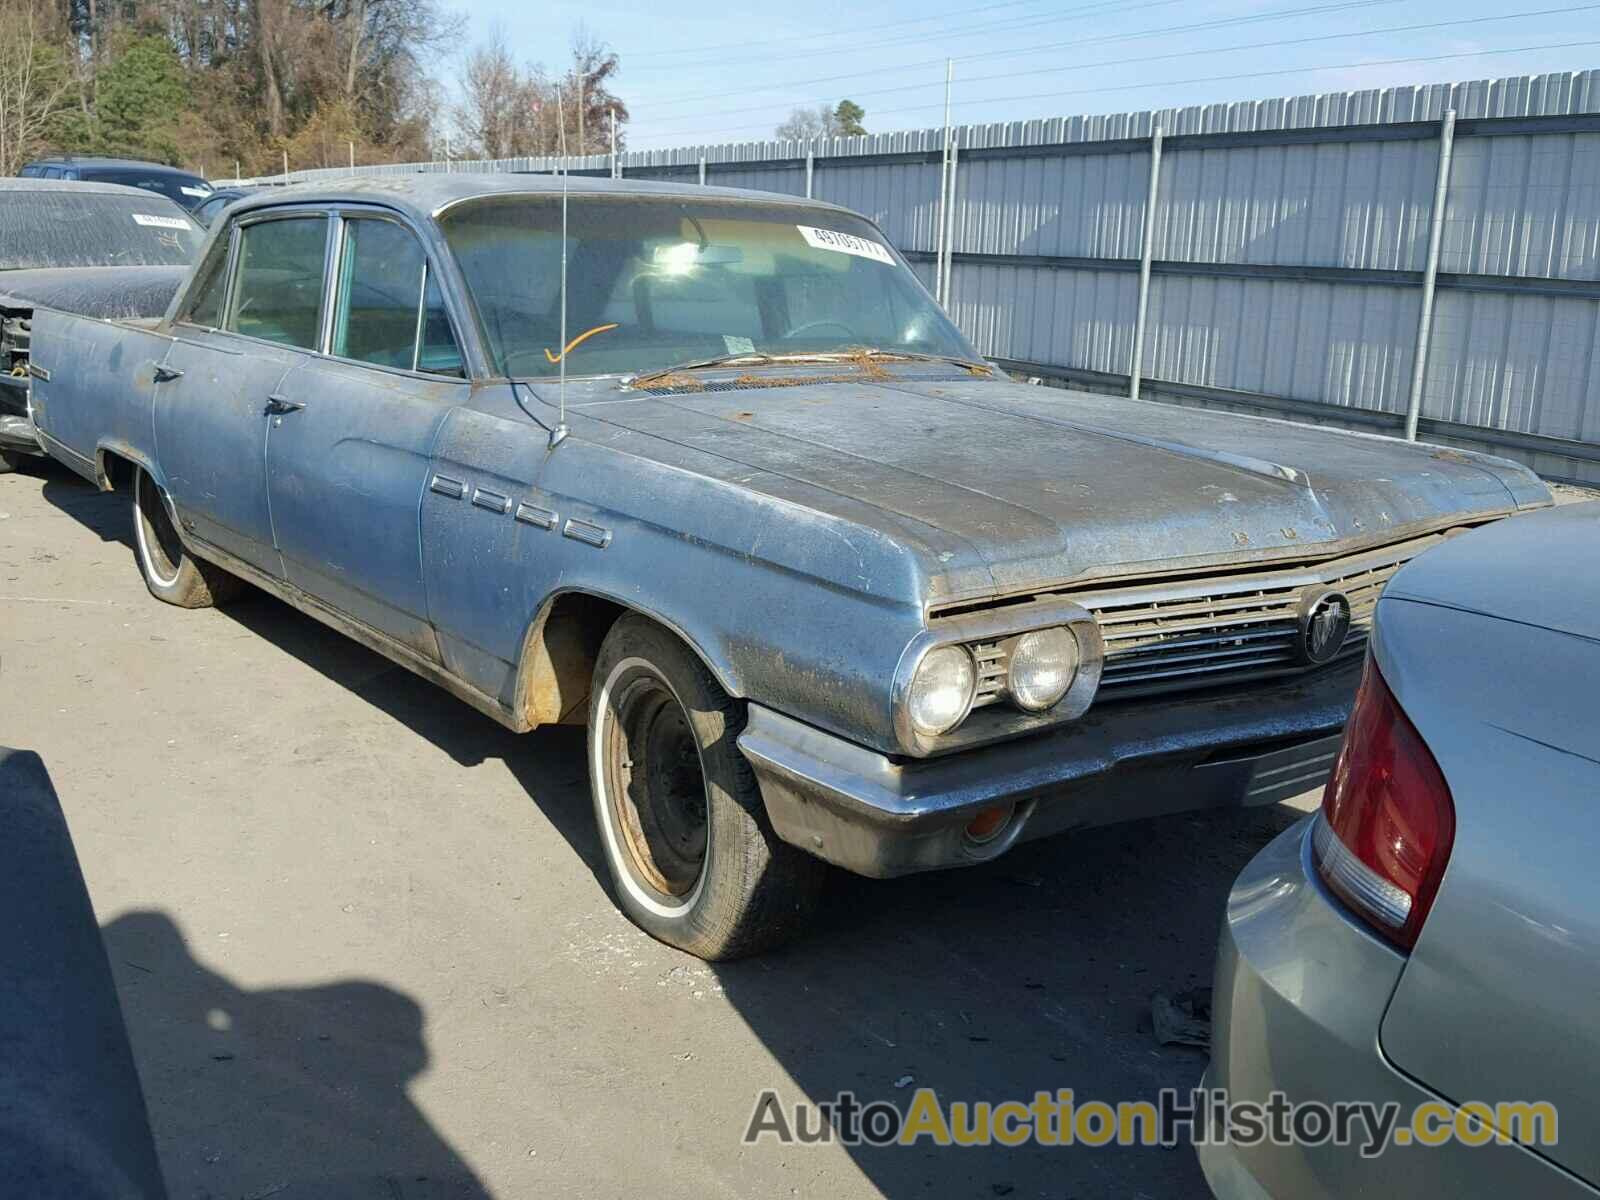 1963 BUICK ELECTRA, 